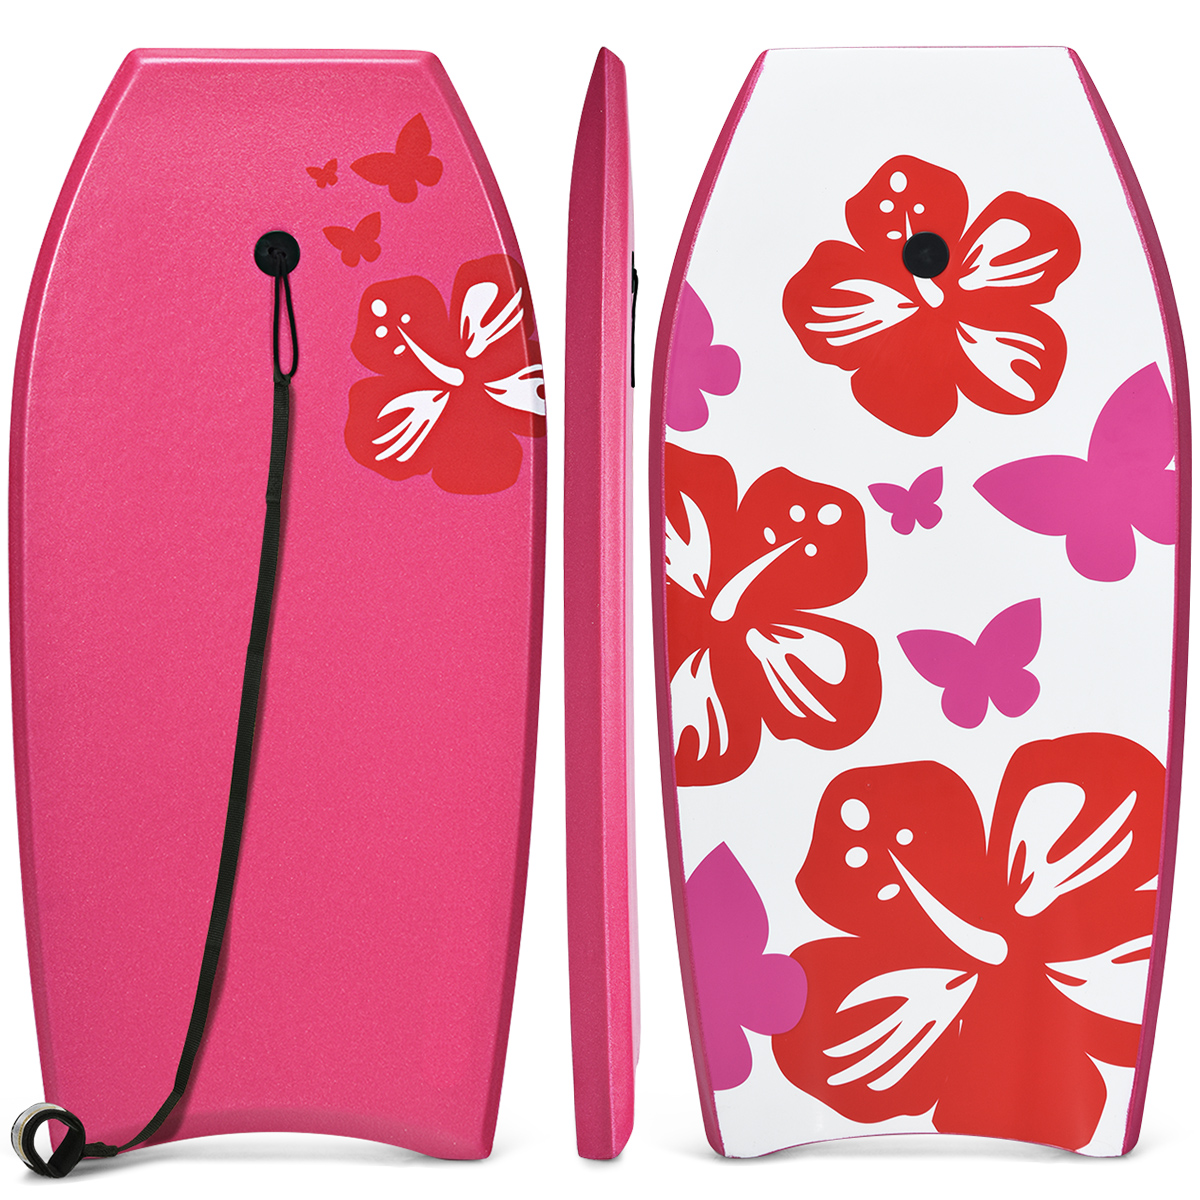 Bodyboard Paddle, Stand COSTWAY Rosa Up